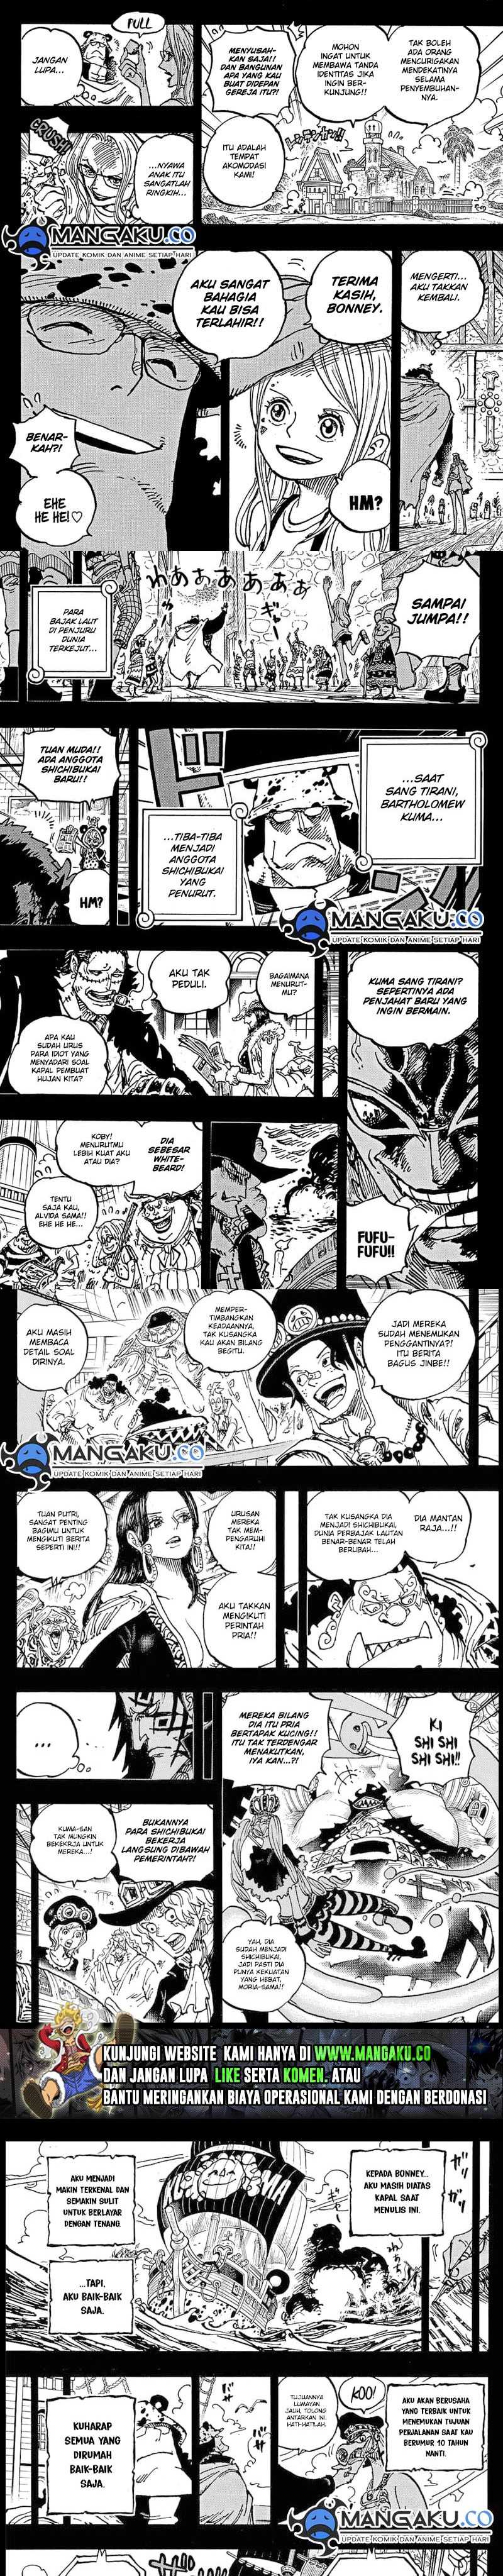 One Piece Chapter 1100 Image 4